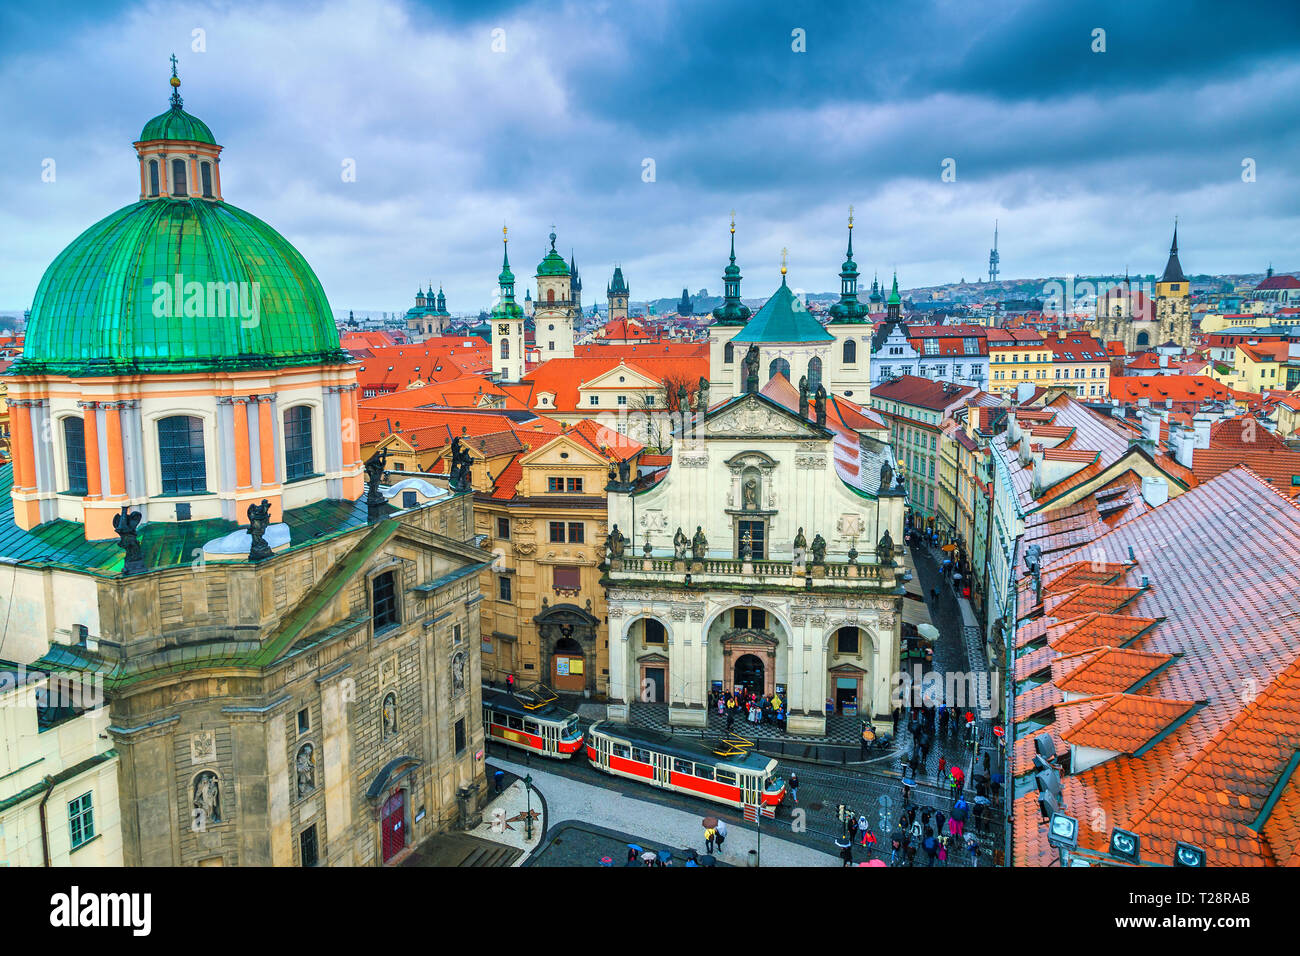 Wonderful travel destination and touristic place. Stunning old town panorama with famous towers and red tram in the best touristic town, Prague, Czech Stock Photo